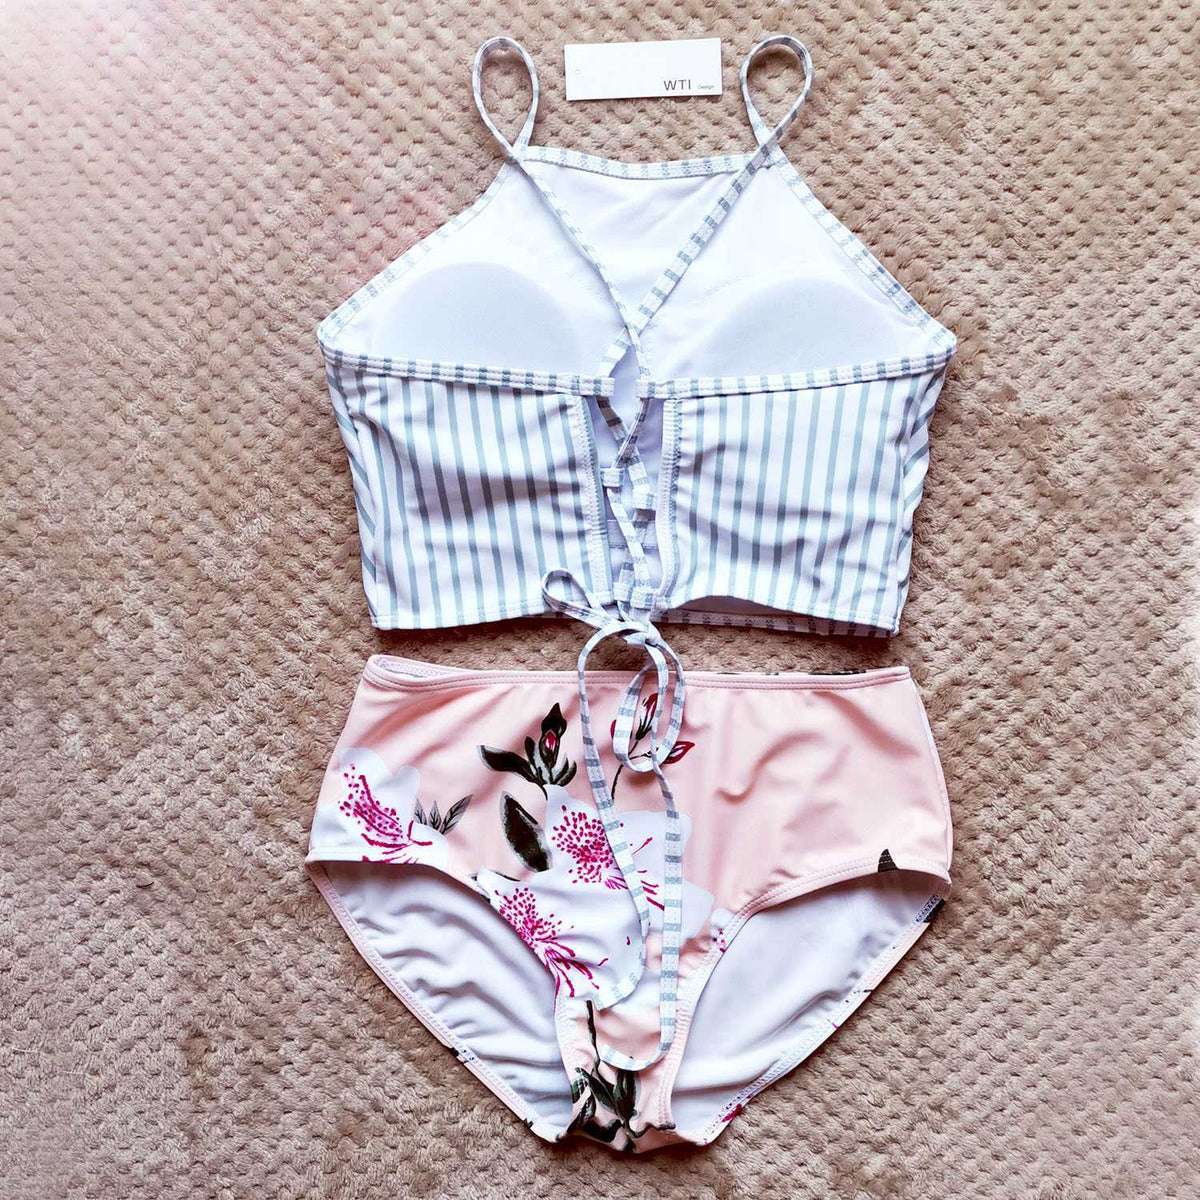 Striped Lace Up Back High Neck Crop Bikini Two Piece Swimsuit – Rose  Swimsuits